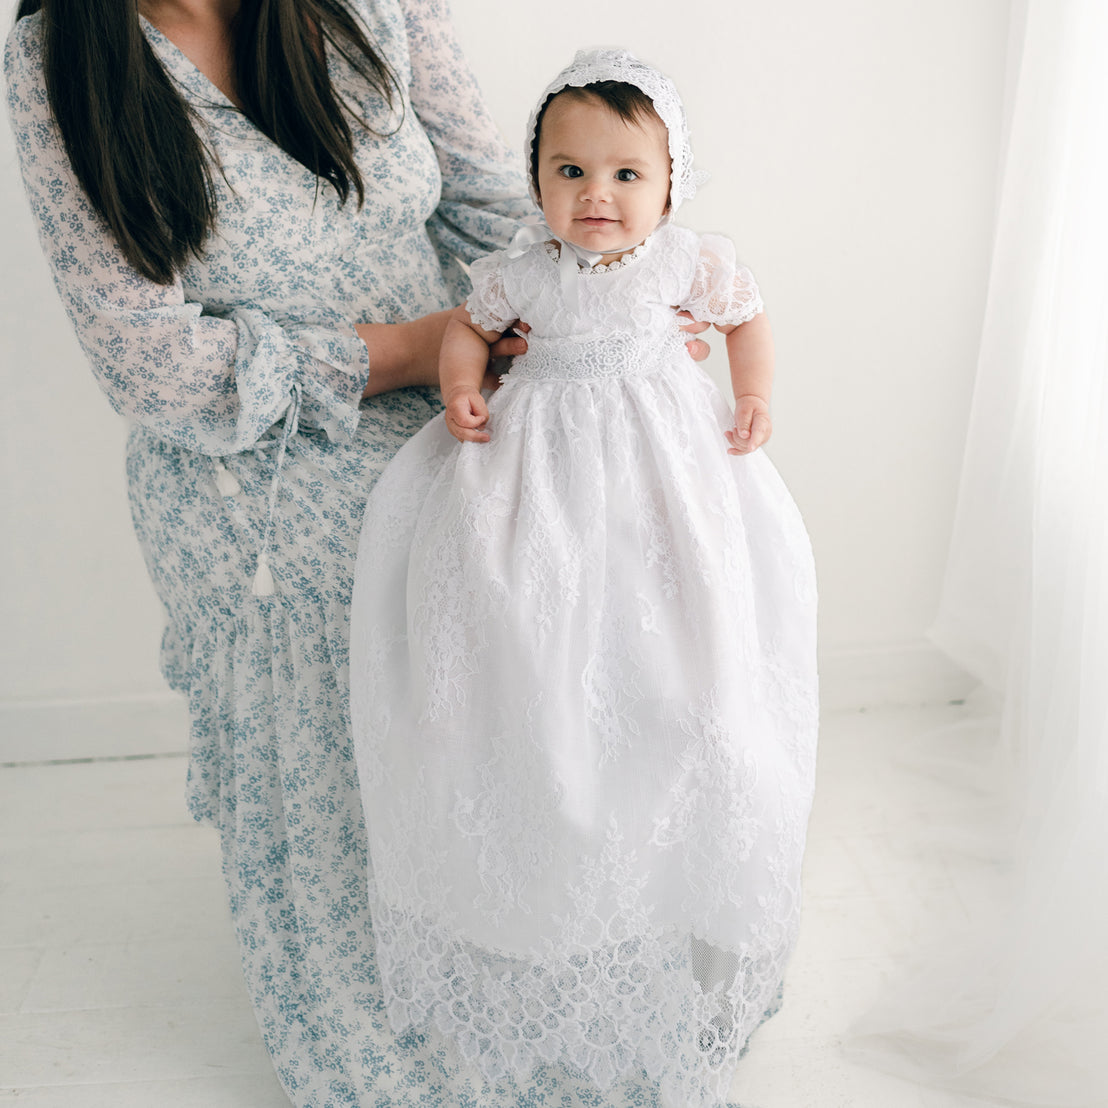 A mother holding her baby, dressed in the Olivia Christening Gown & Bonnet, with the baby looking directly at the camera. They stand against a plain white backdrop.